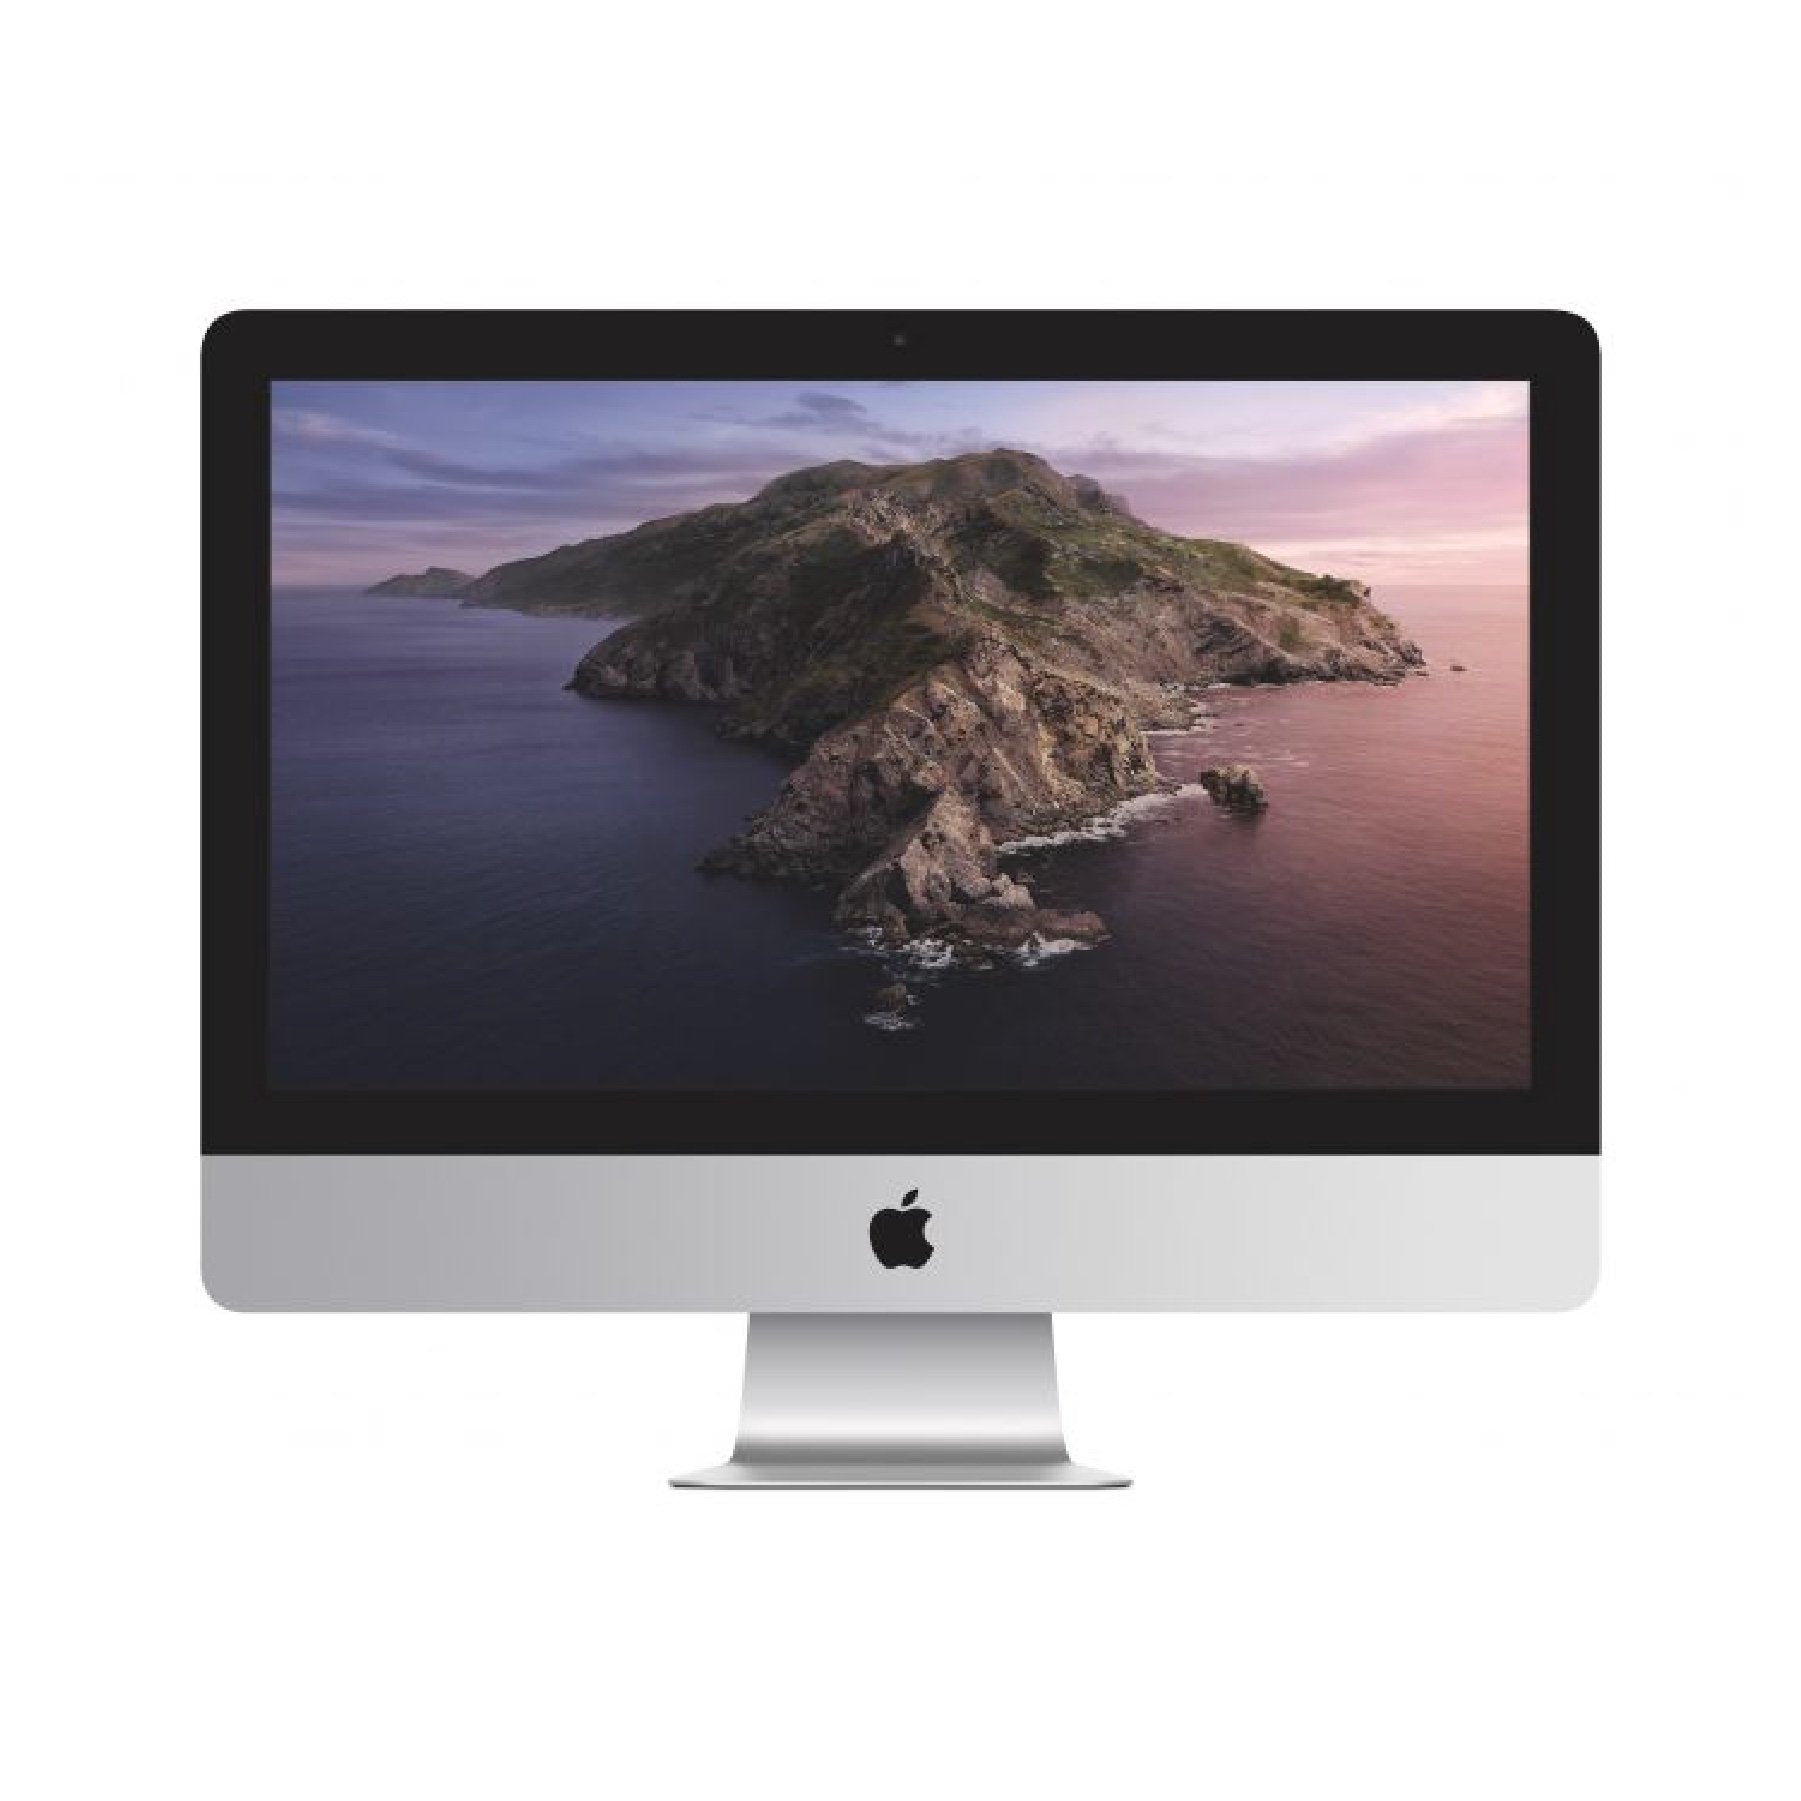 iMac (Retina 4K, 21.5-inch, 2019) 1TB - Silver (Better) - iStore Pre-owned